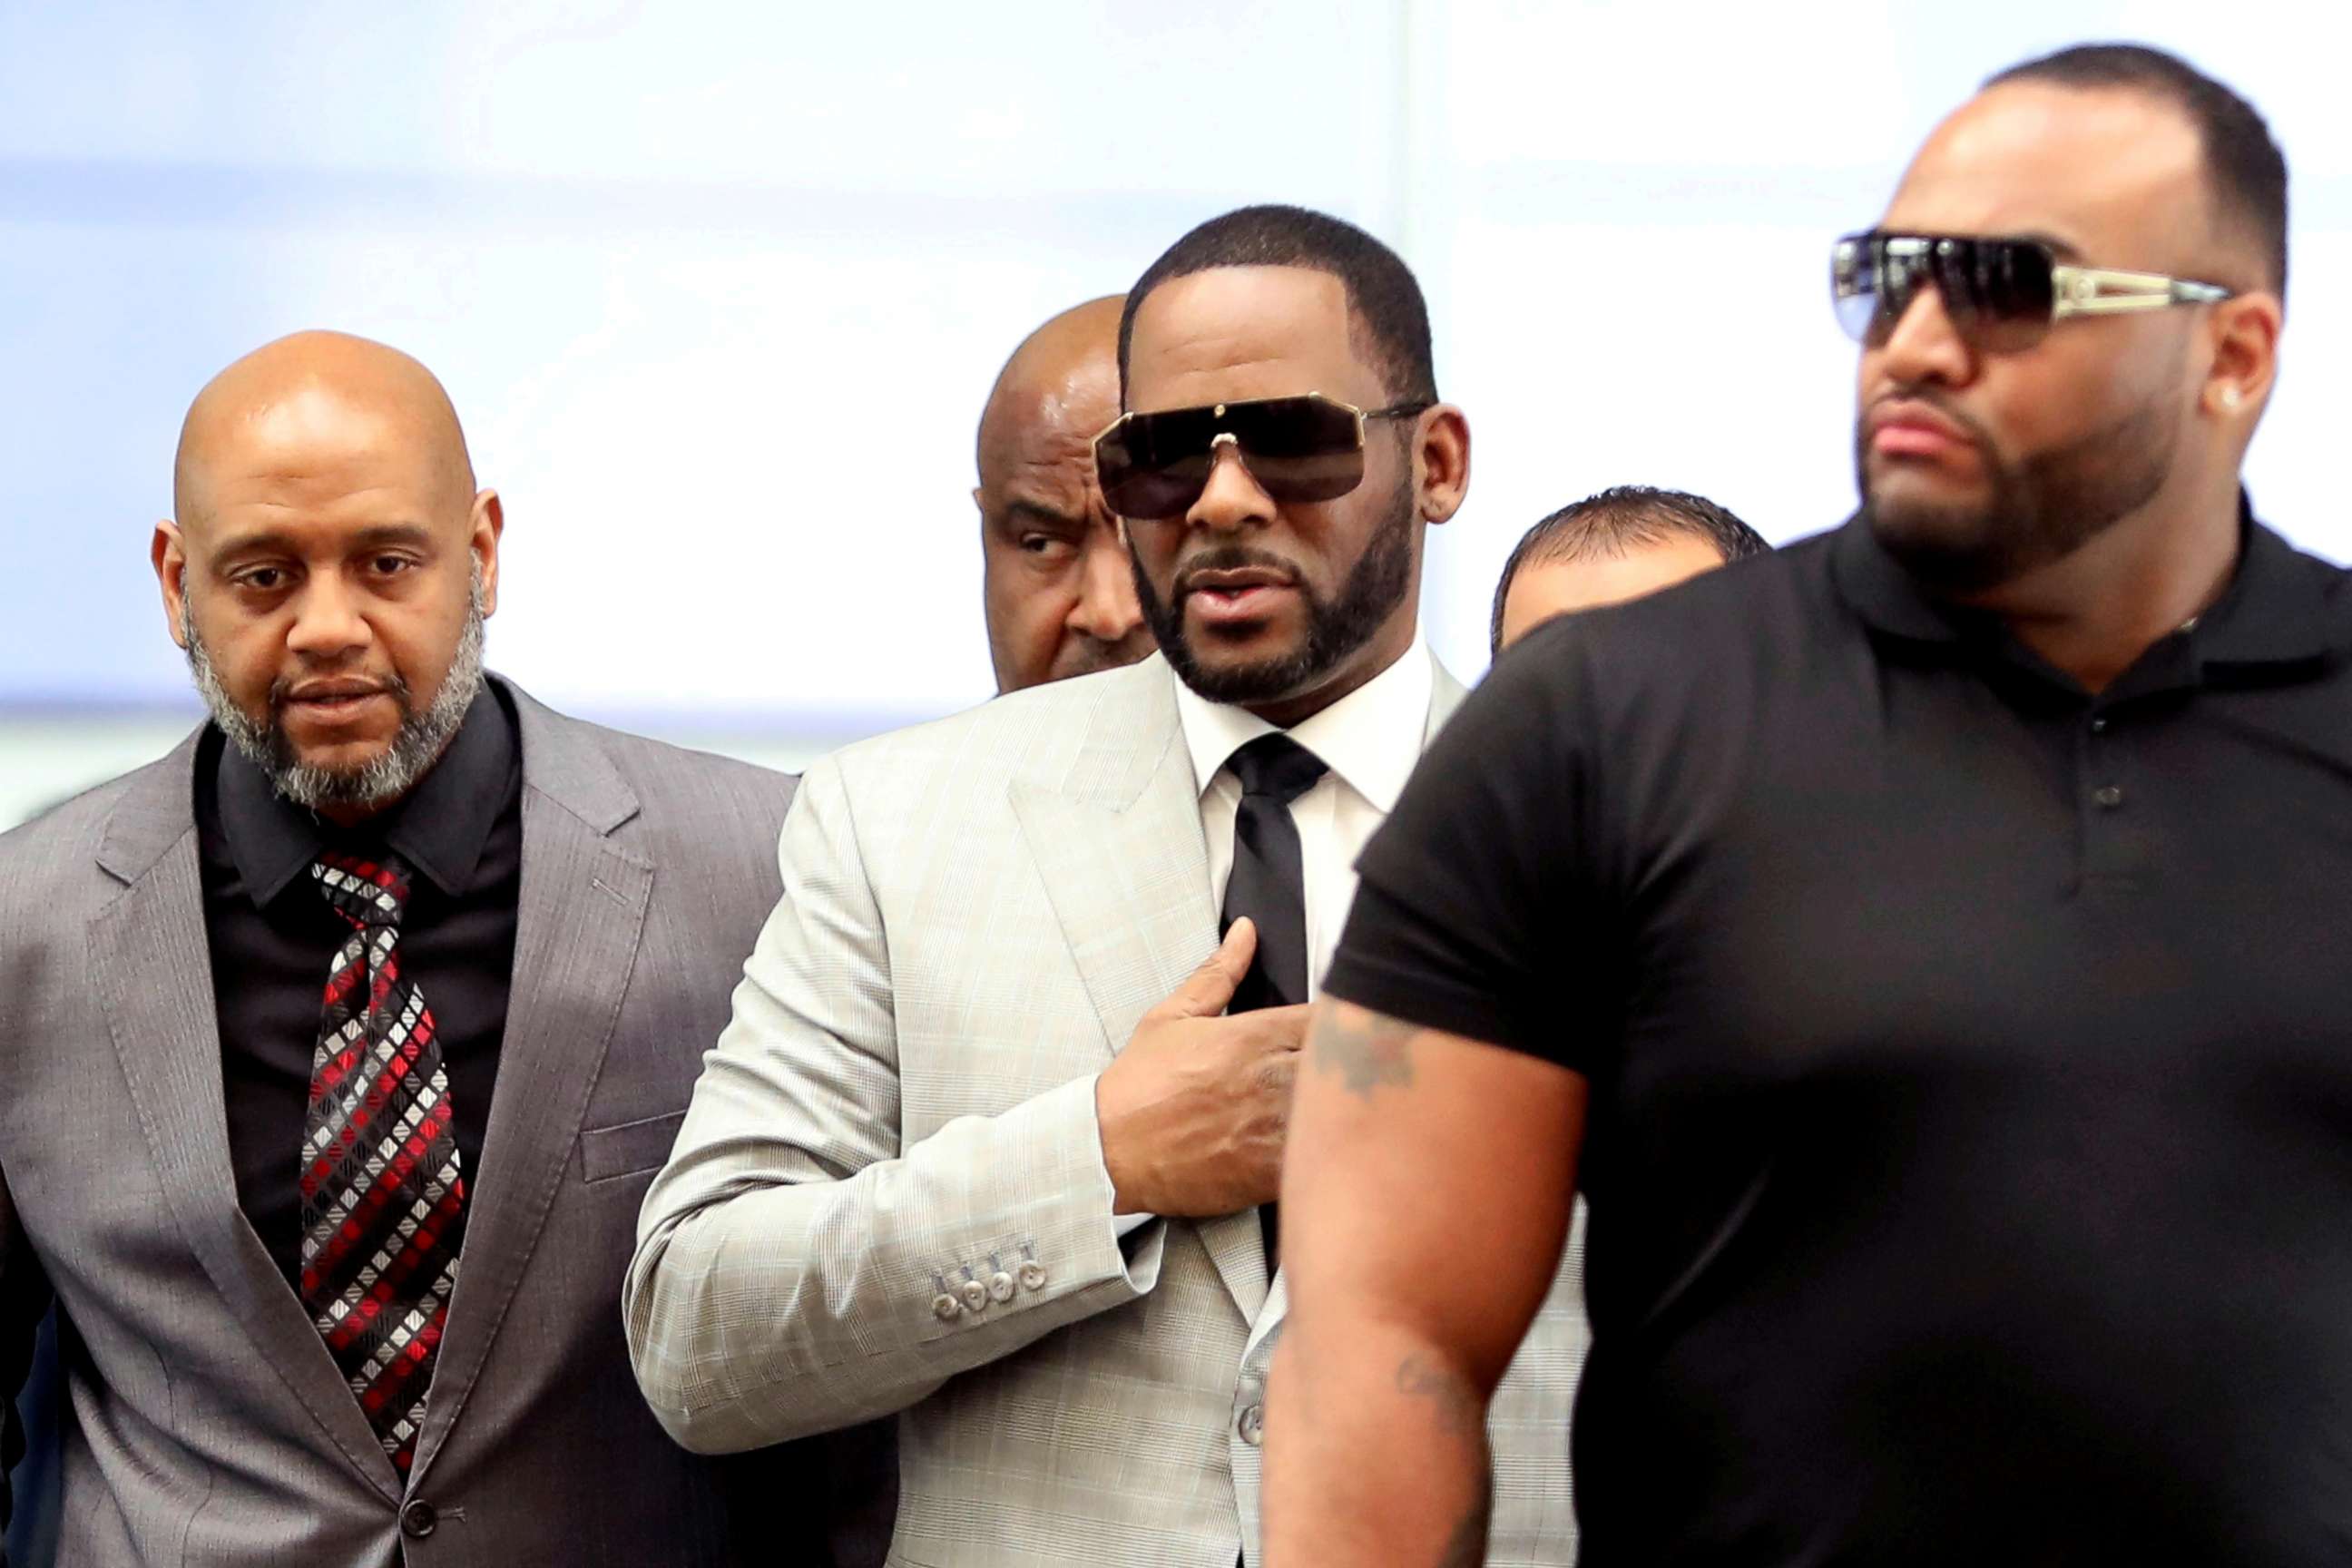 PHOTO: File Photo: R. Kelly, center, walks inside the Criminal Court Building as he arrives for a hearing on charges of criminal sexual abuse in Chicago on June 6, 2019.